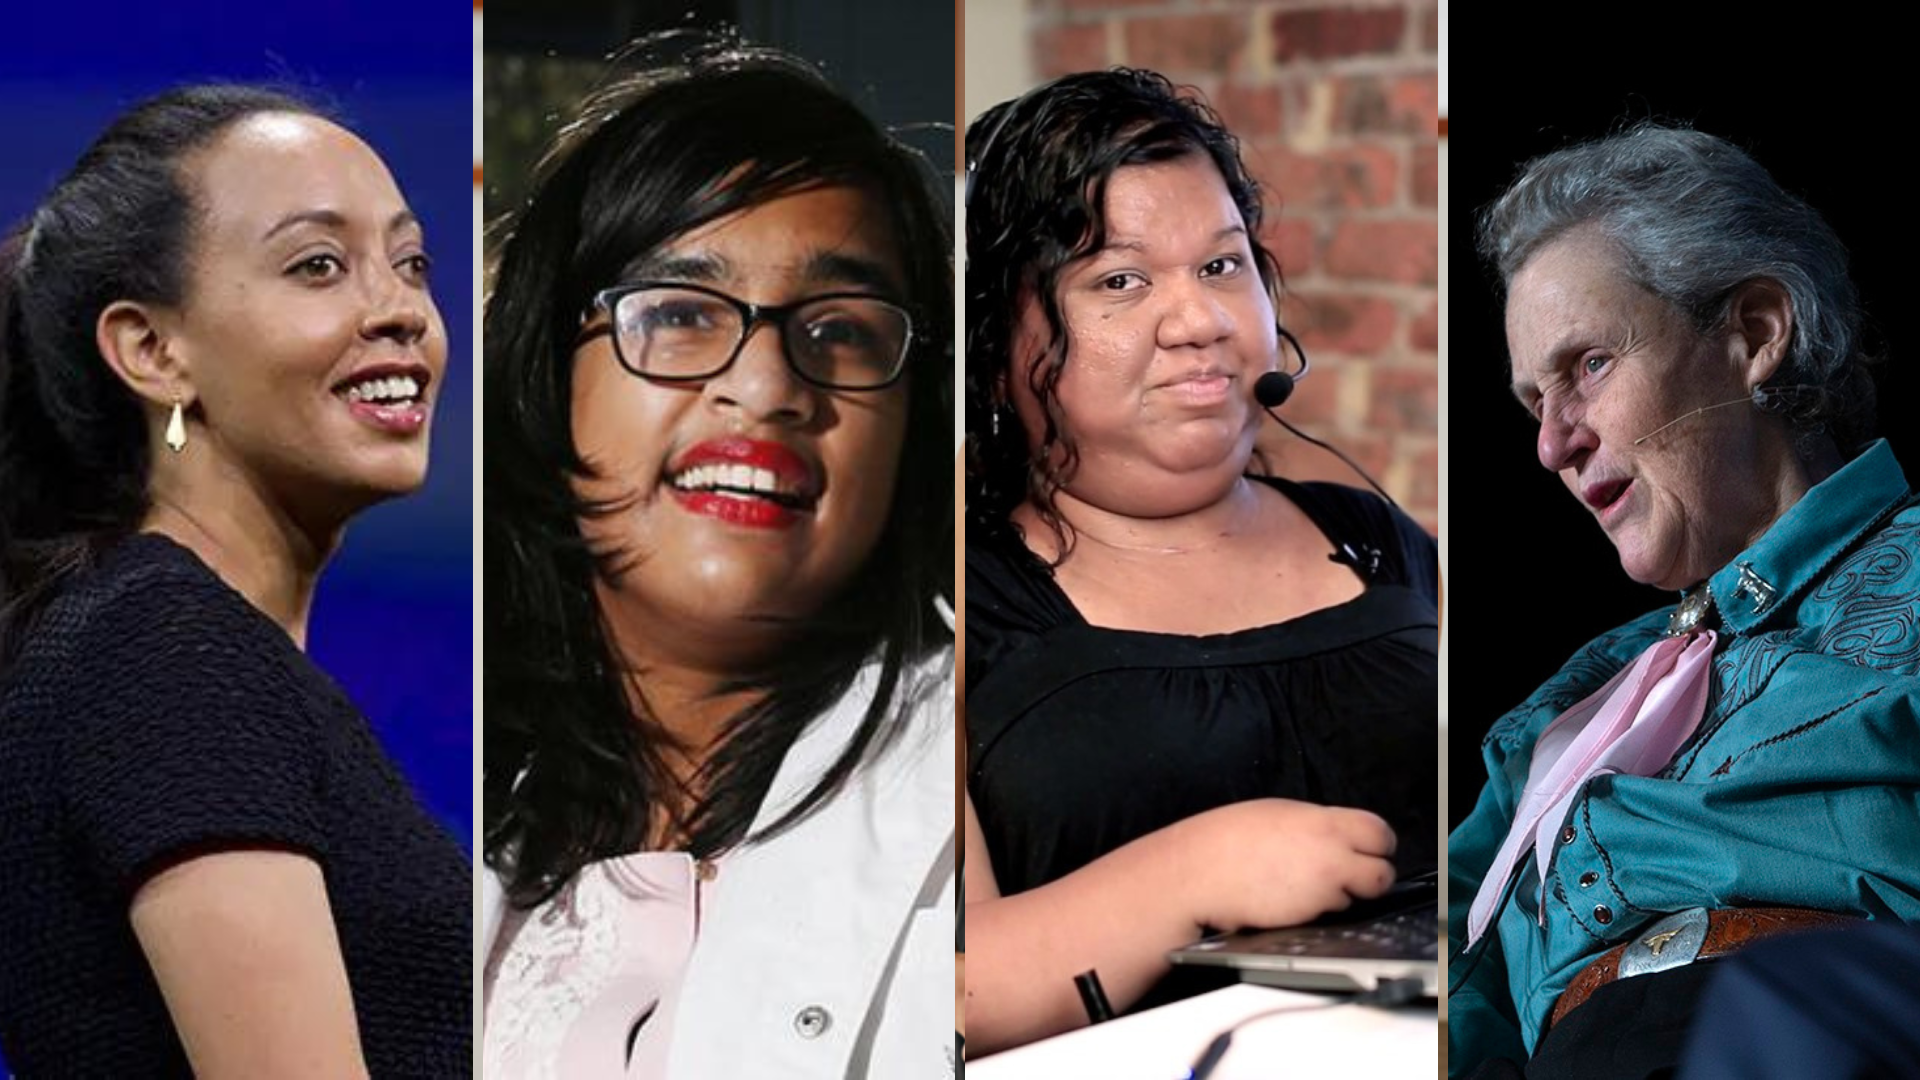 Powerful Women with Disabilities Who Are Cracking the Code